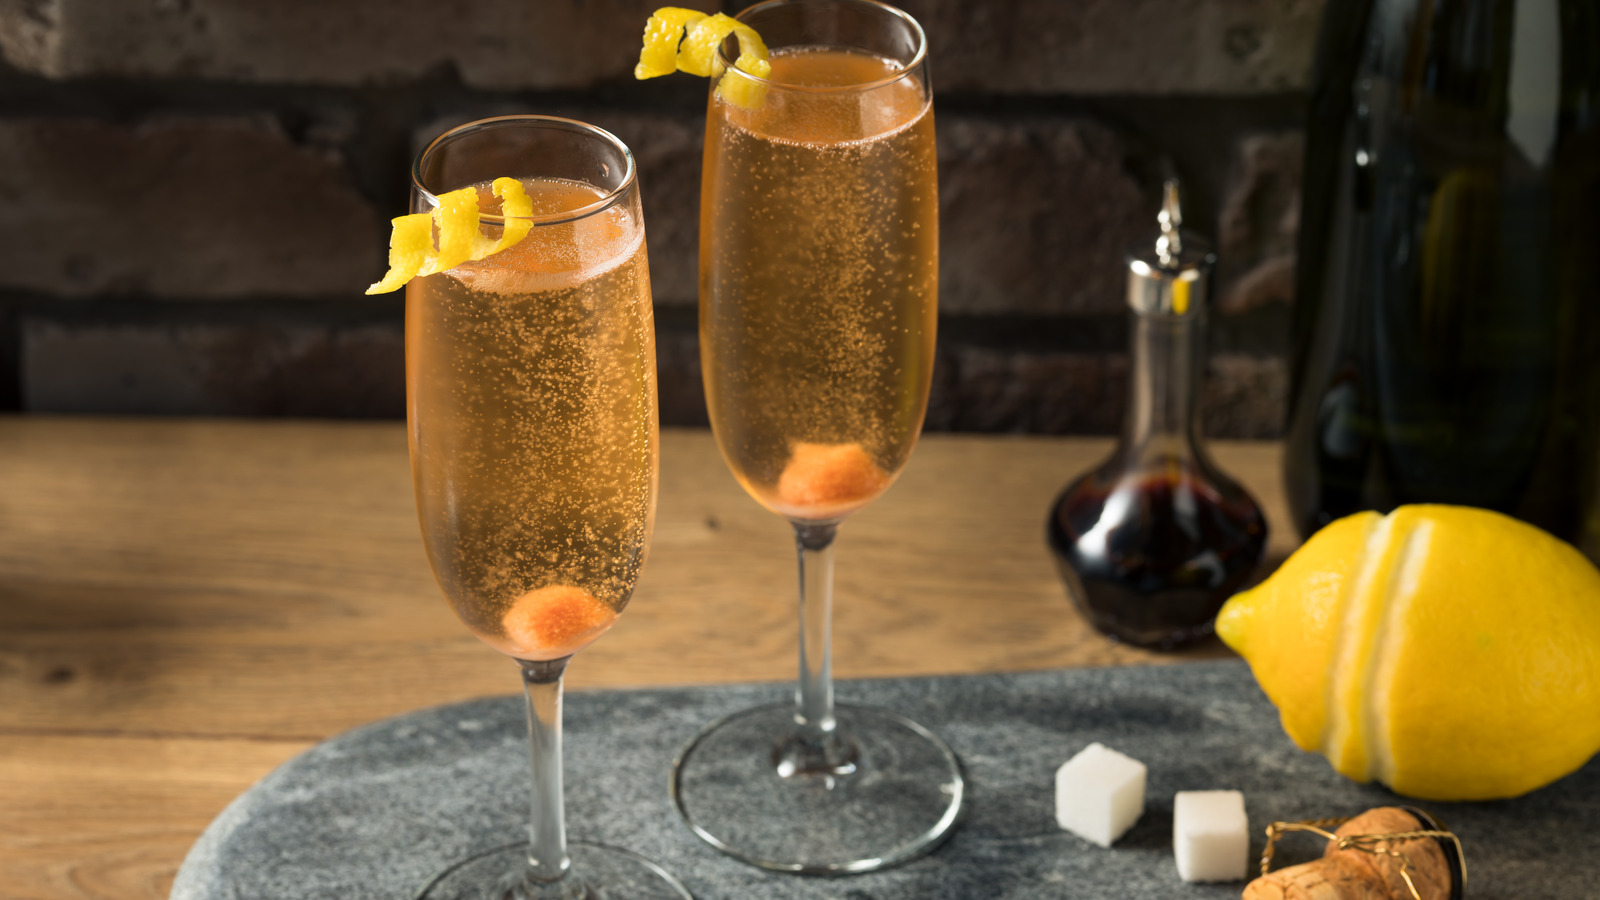 https://www.tastingtable.com/img/gallery/the-reason-people-drop-sugar-cubes-in-a-glass-of-champagne/l-intro-1678209246.jpg